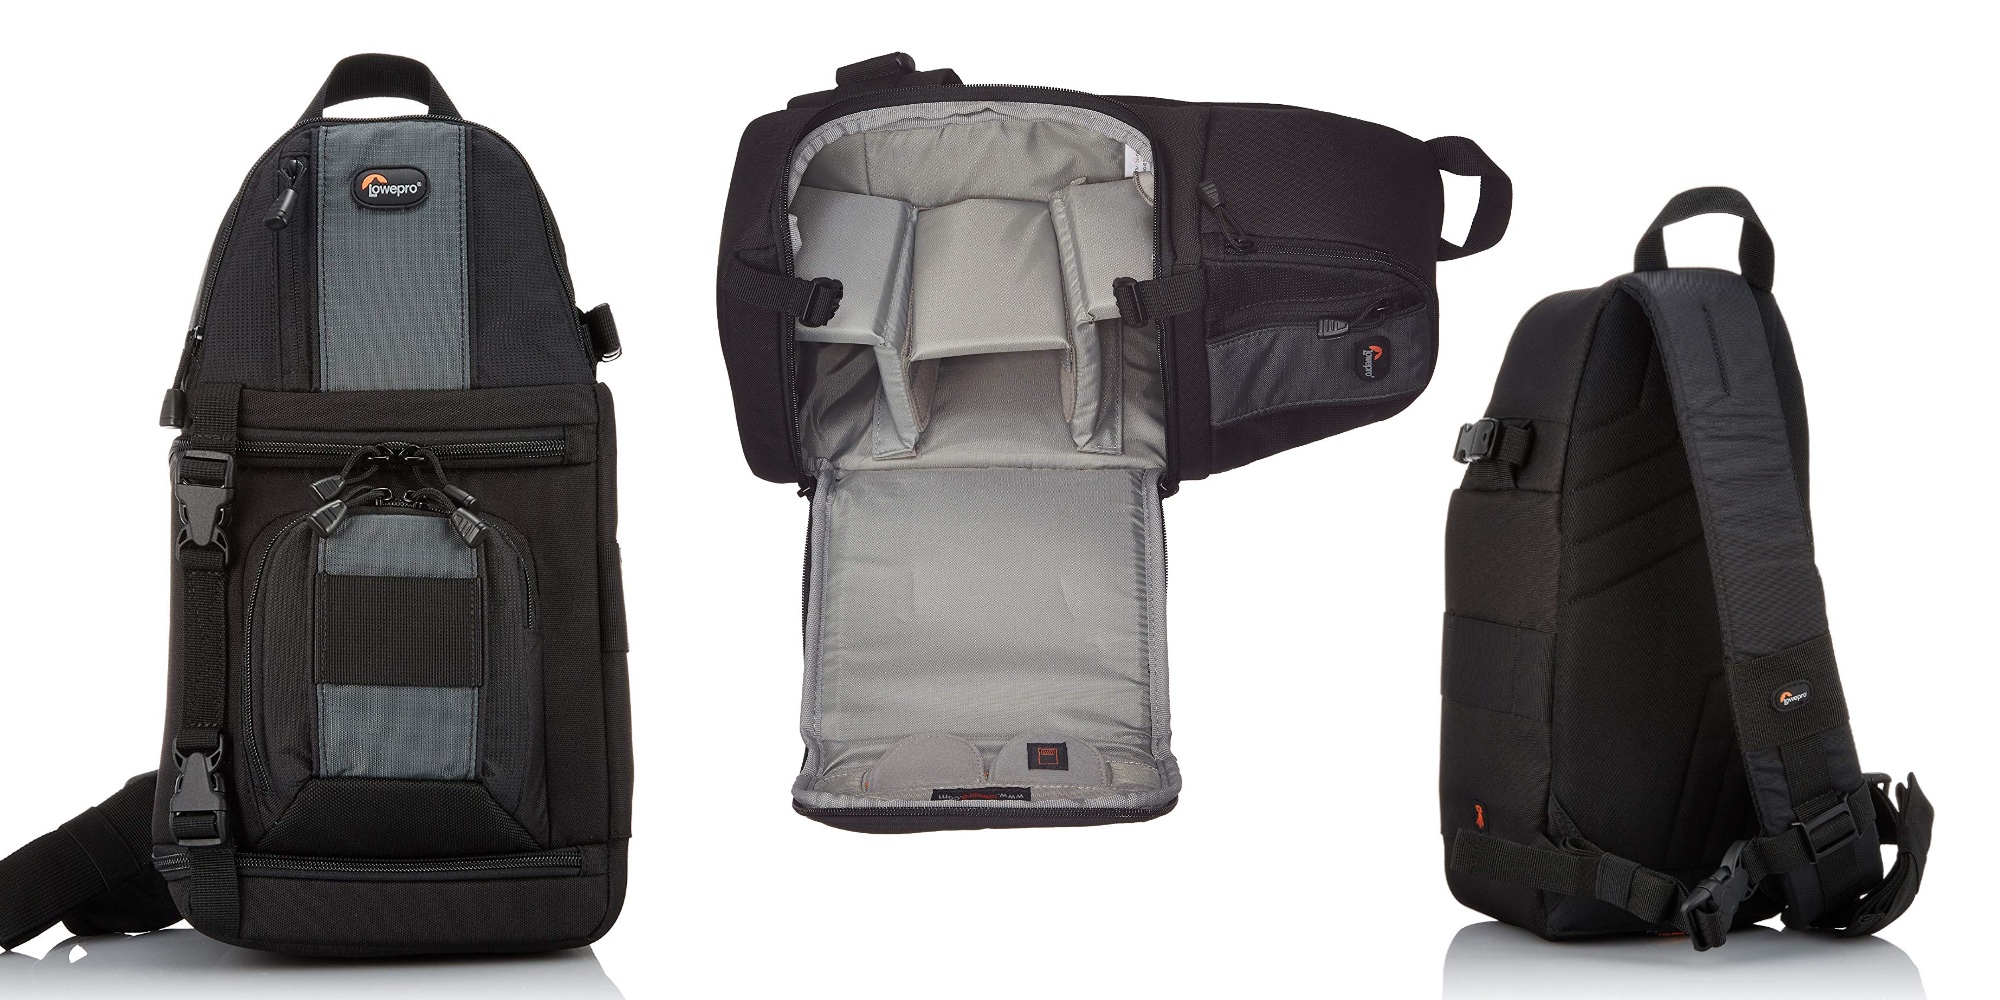 Save 30% on Lowepro&#39;s SlingShot 102 AW Camera Bag at an all-time low of $35 - 9to5Toys